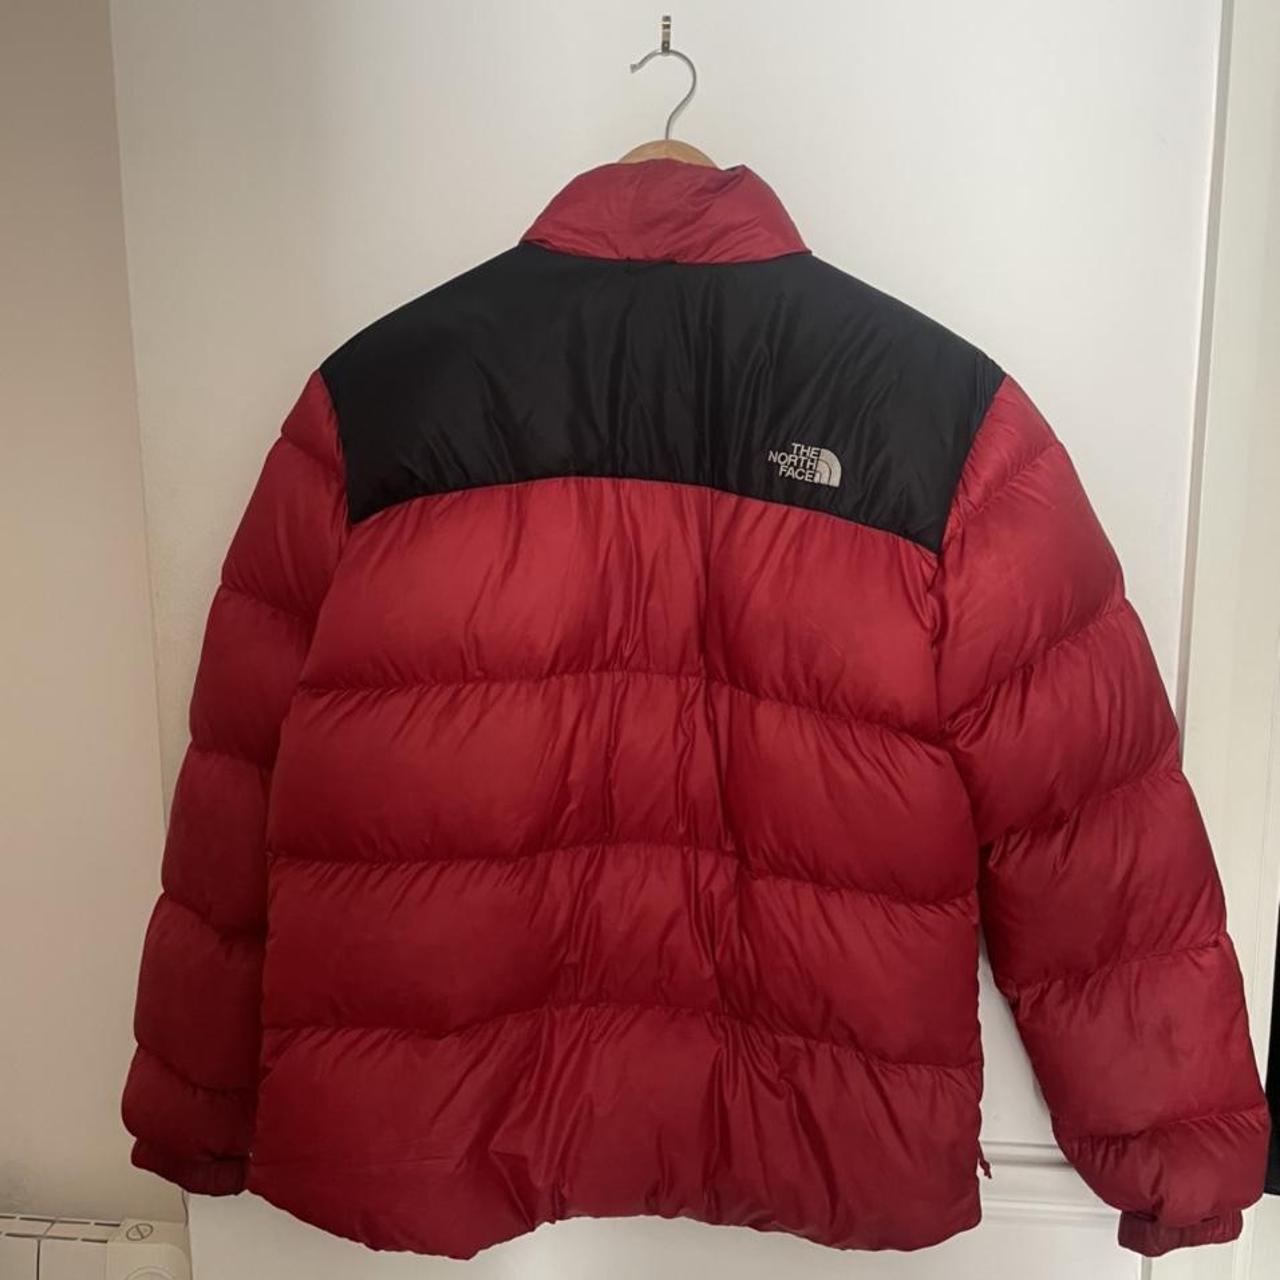 North face nupste puffer jacket, size large, very... - Depop